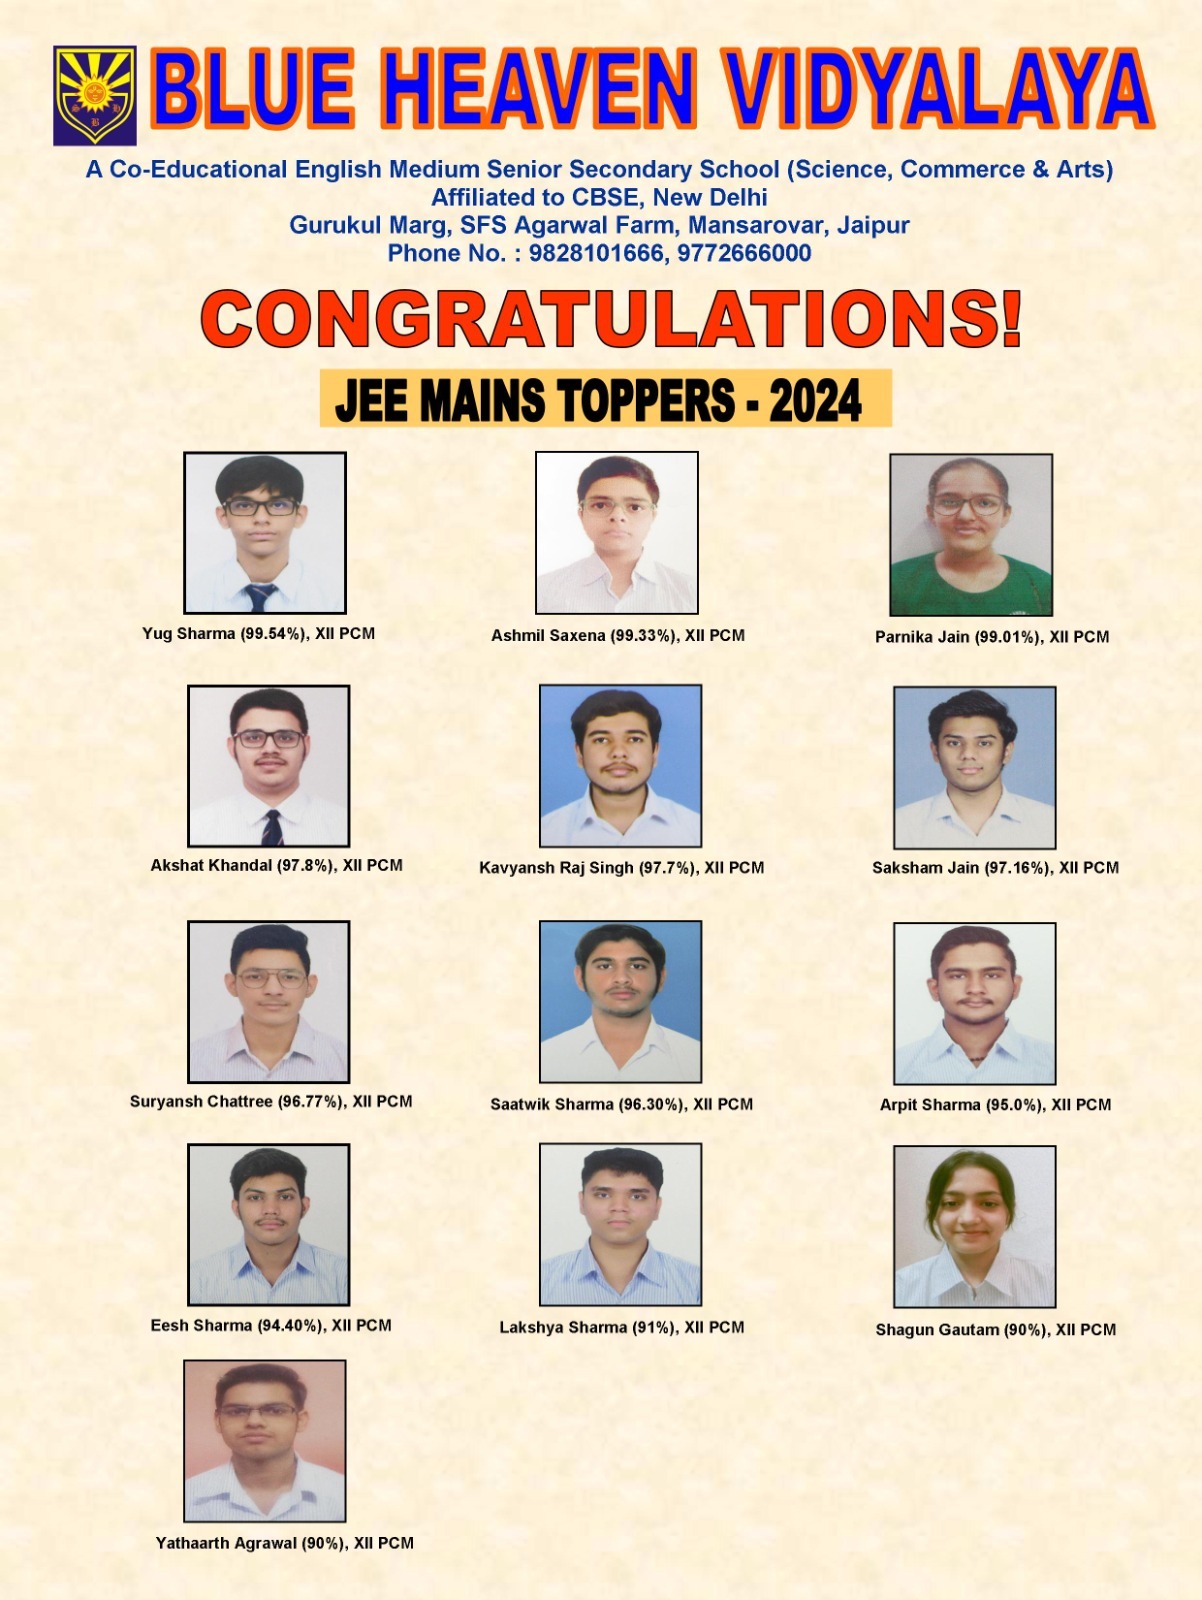 JEE mains Toppers 2024